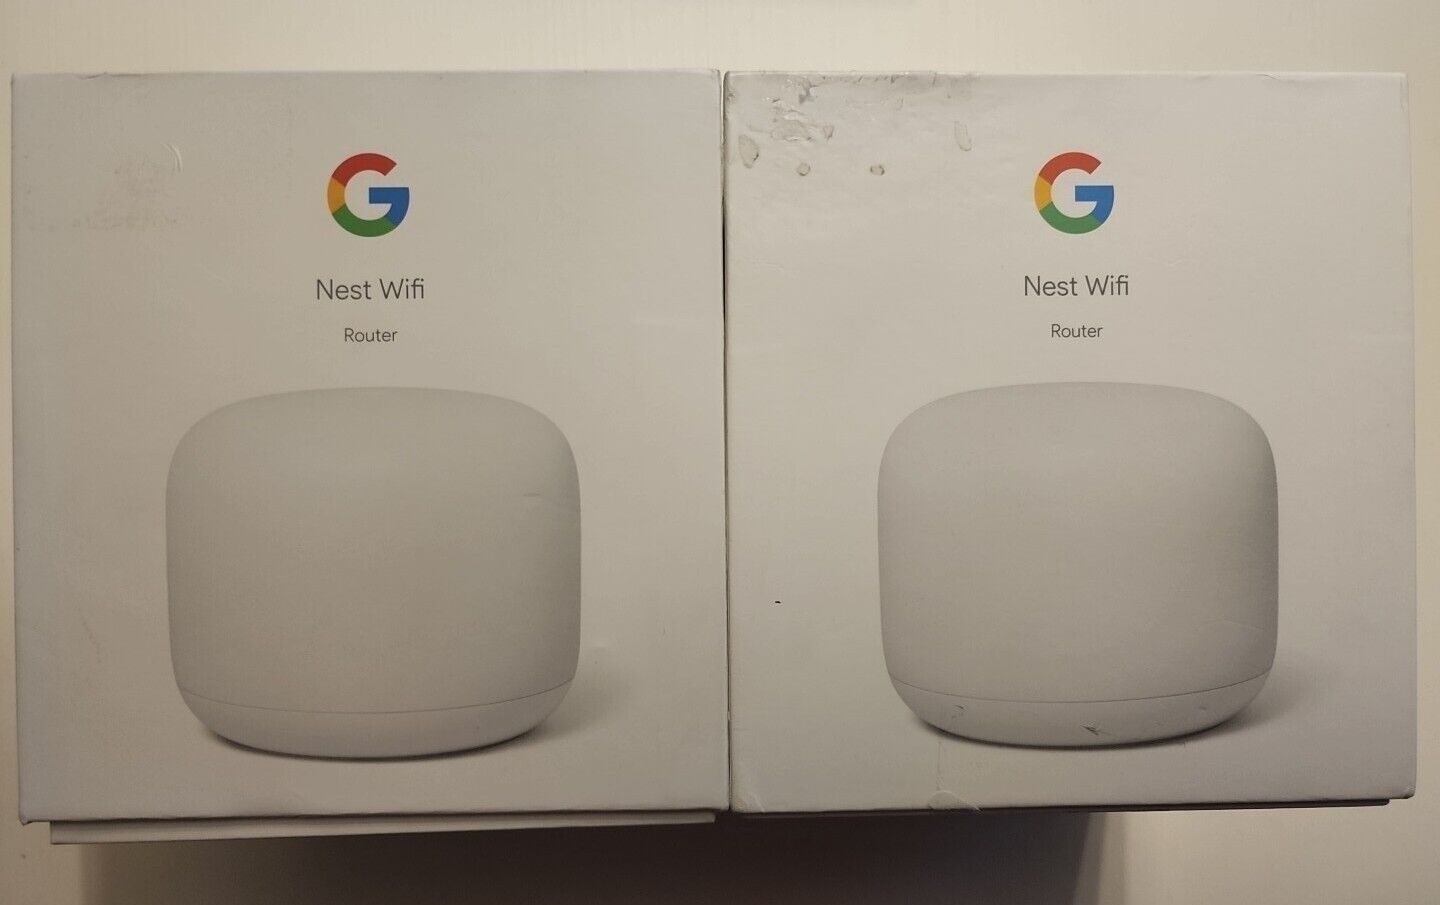 NEW Open Box Lot Of 2 Google Nest Routers- Snow White GA00595-US